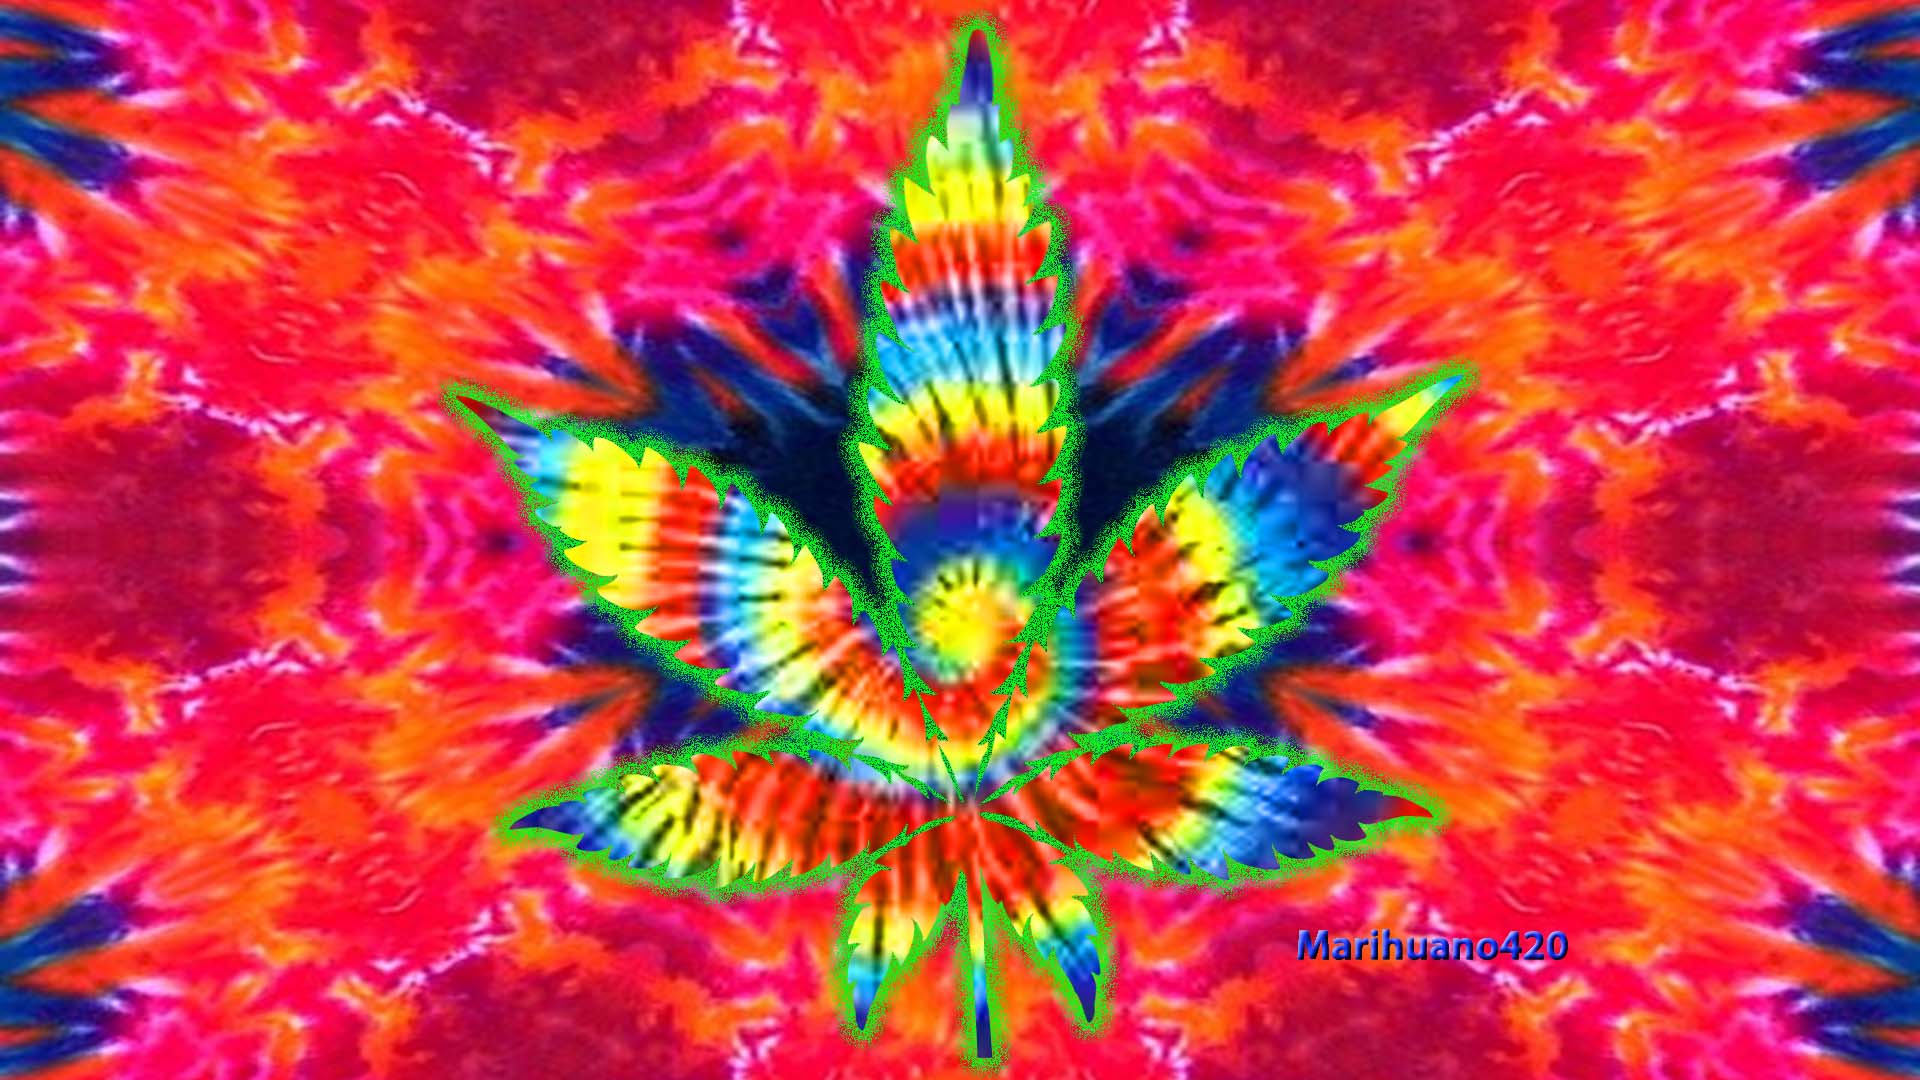 Trippy Weed Backgrounds Hippie wallpaper weed